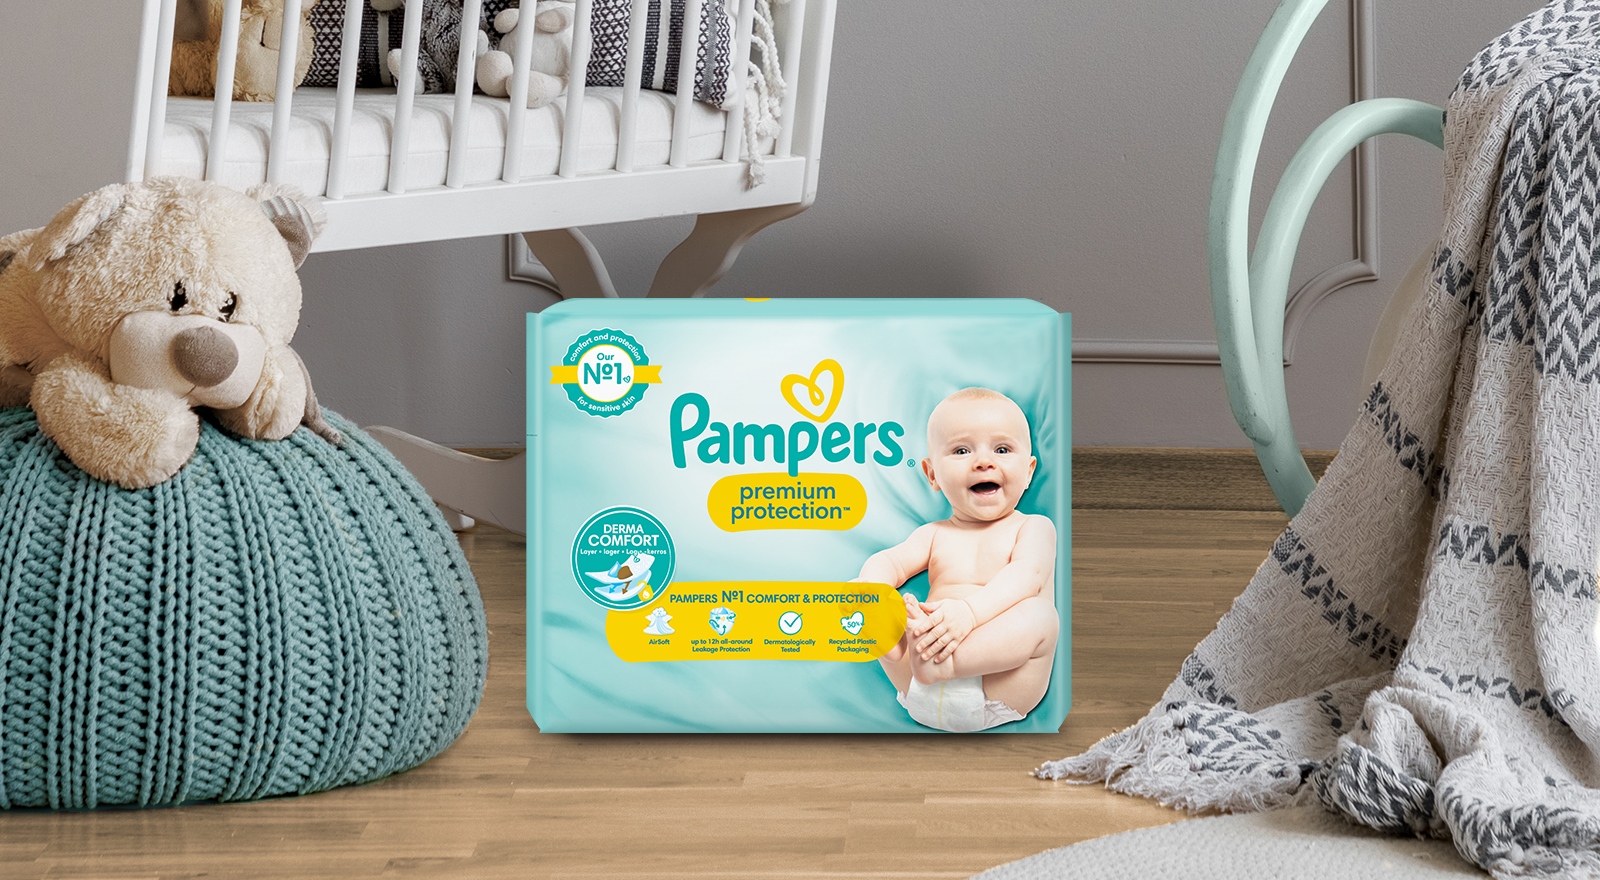 280 Couches Pampers Premium Protection taille 1